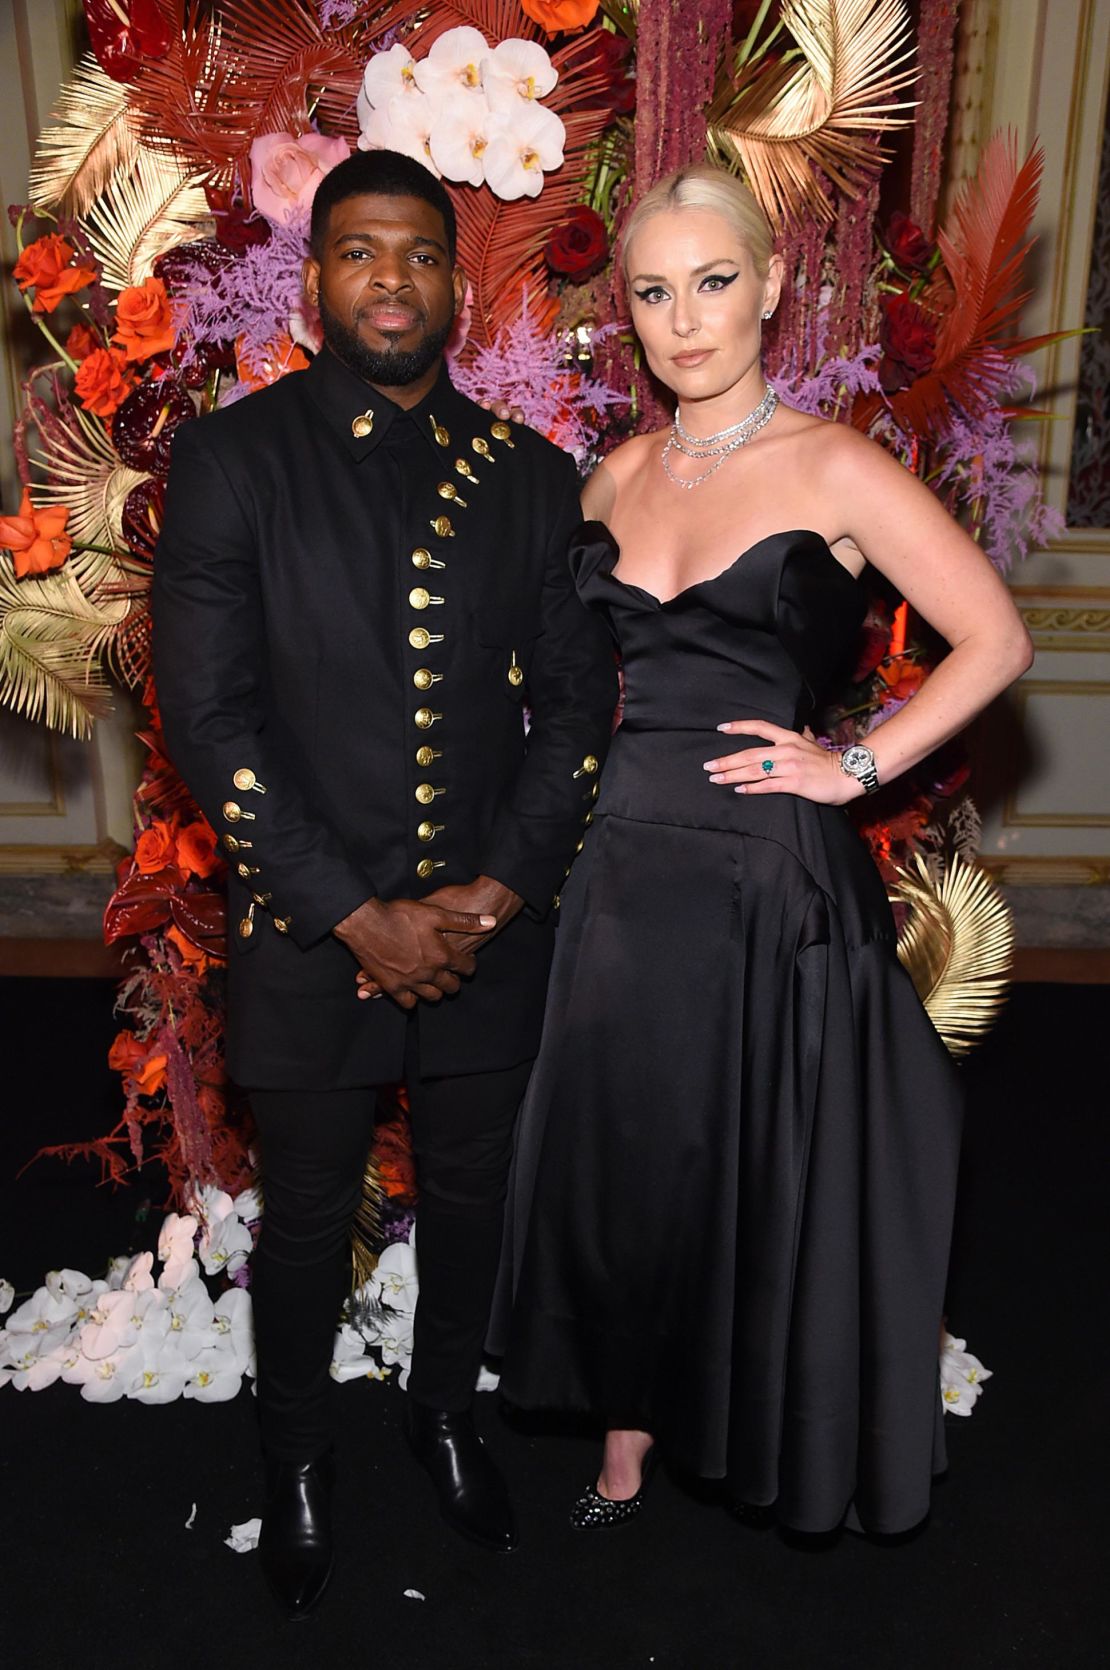 PK Subban and Lindsey Vonn attend as Harper's BAZAAR celebrates "ICONS By Carine Roitfeld" at The Plaza Hotel.